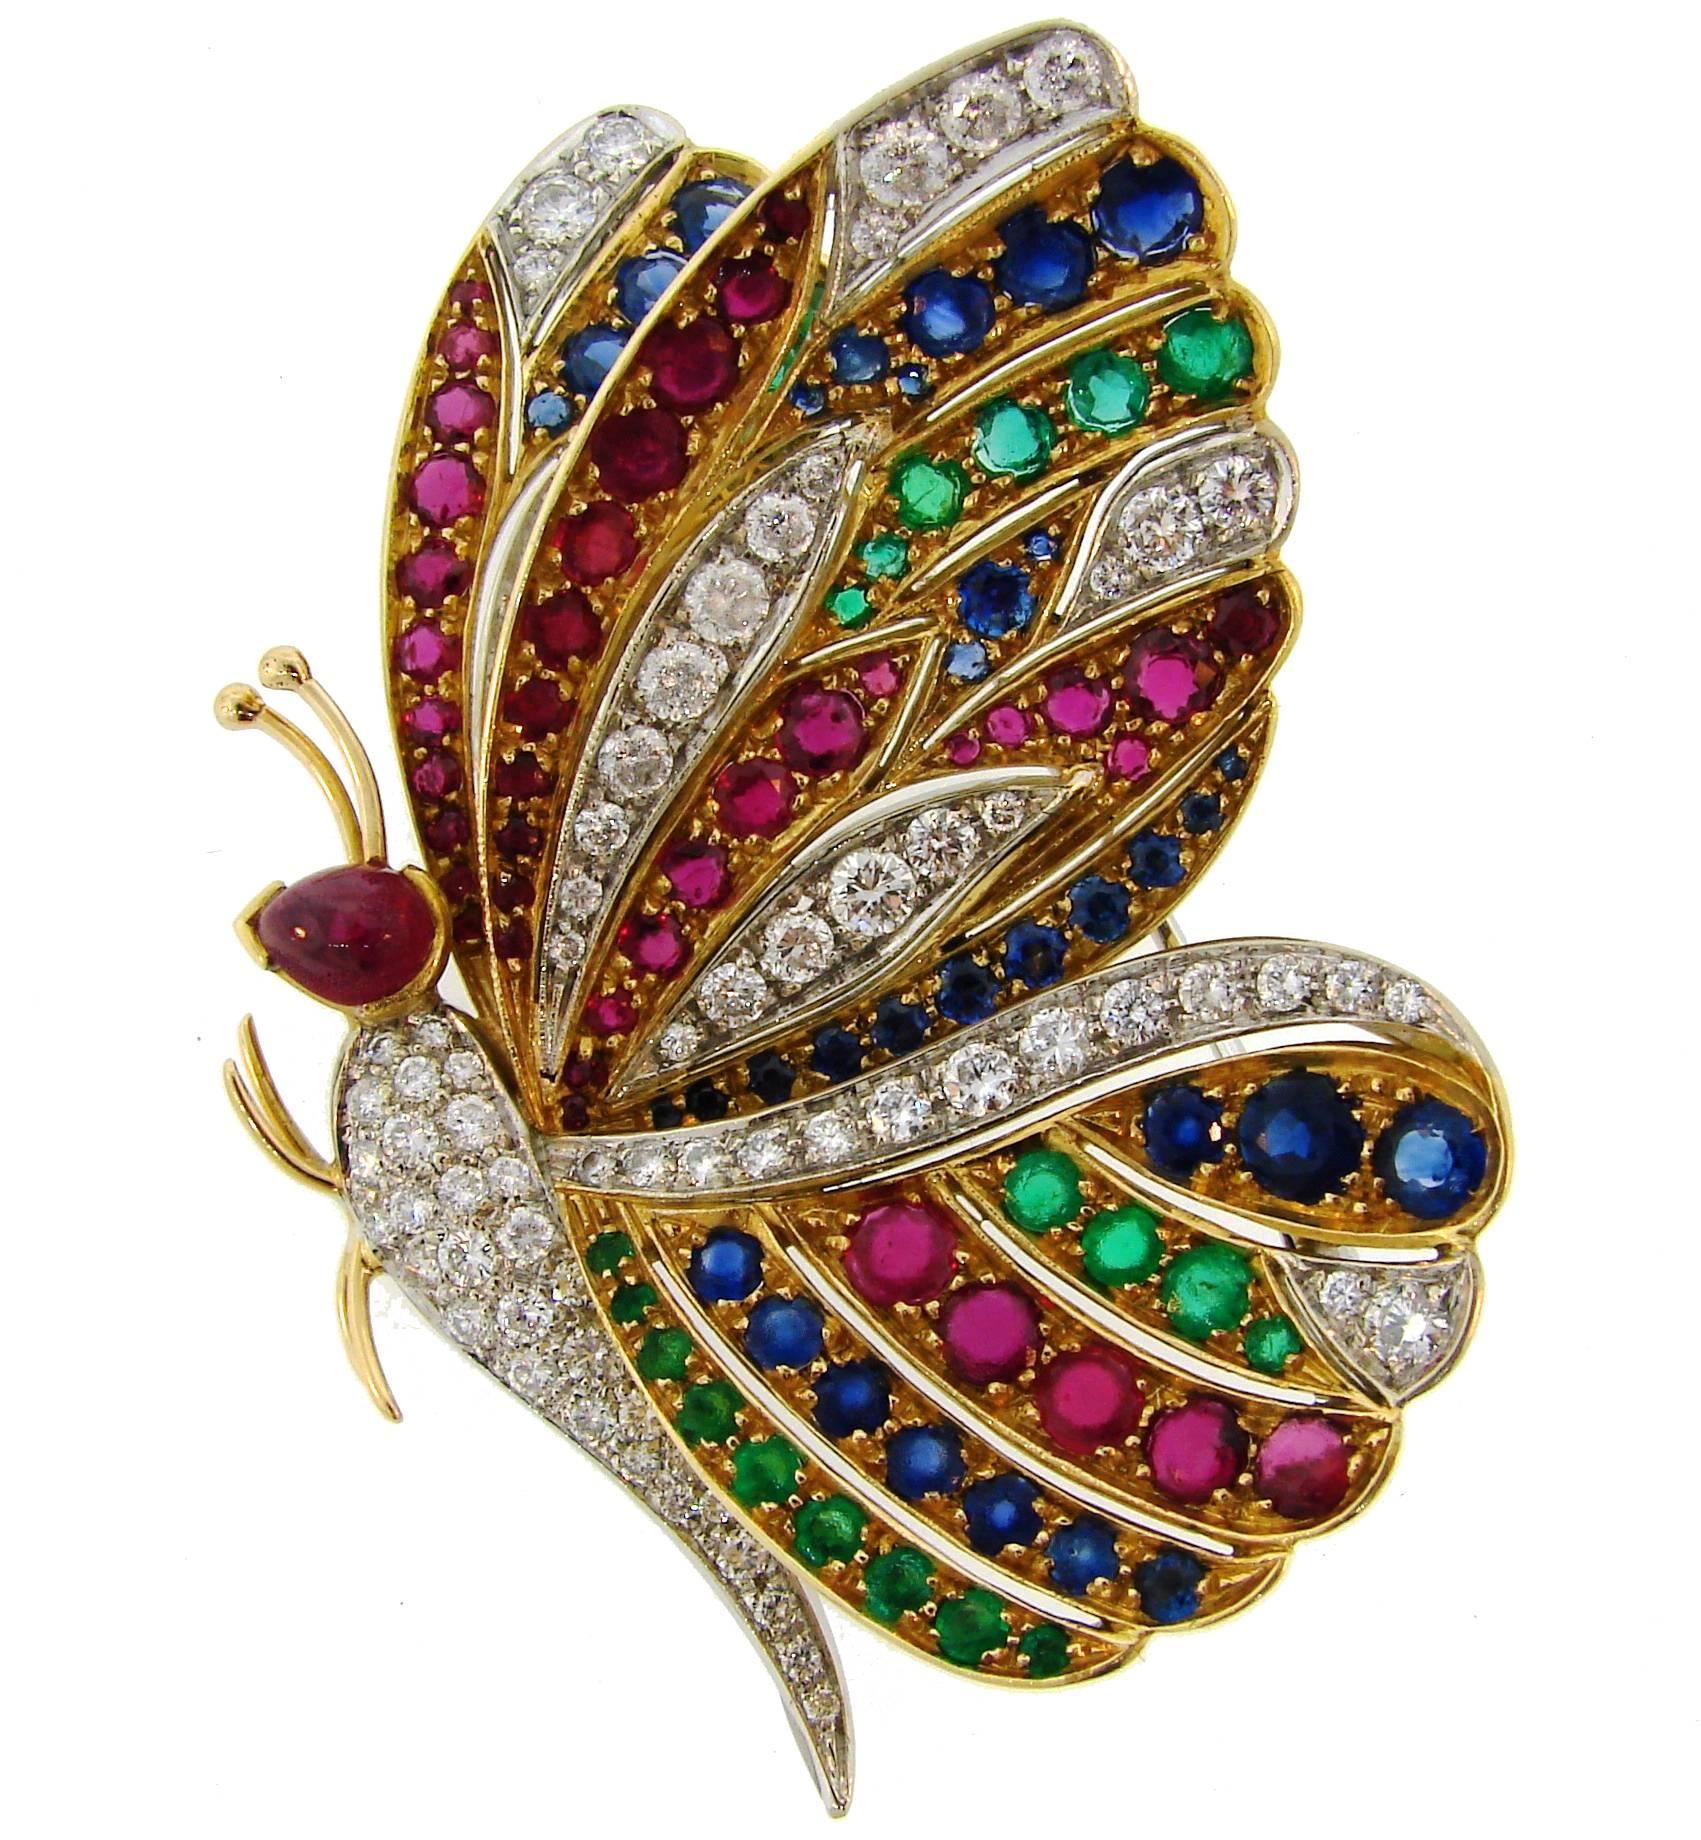 Lovely colorful butterfly pin created in Italy in the 1980's. Its gracious lines, rich colors and sparkle of the diamonds make the clip a chic and stylish accent on your blouse, dress, jacket or sweater. It is elegant and wearable and is a great